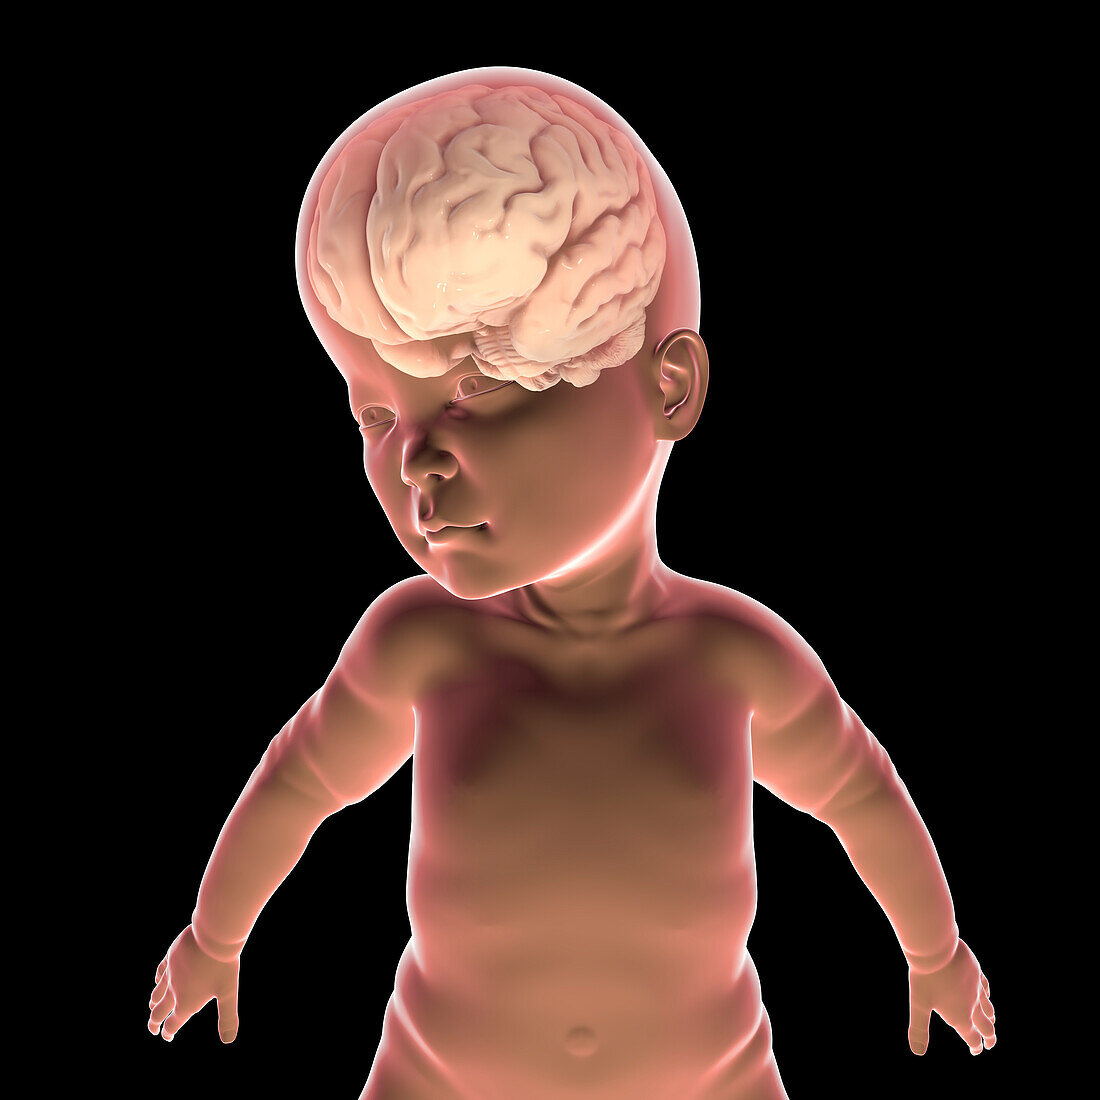 Child with macrocephaly and enlarged brain, illustration